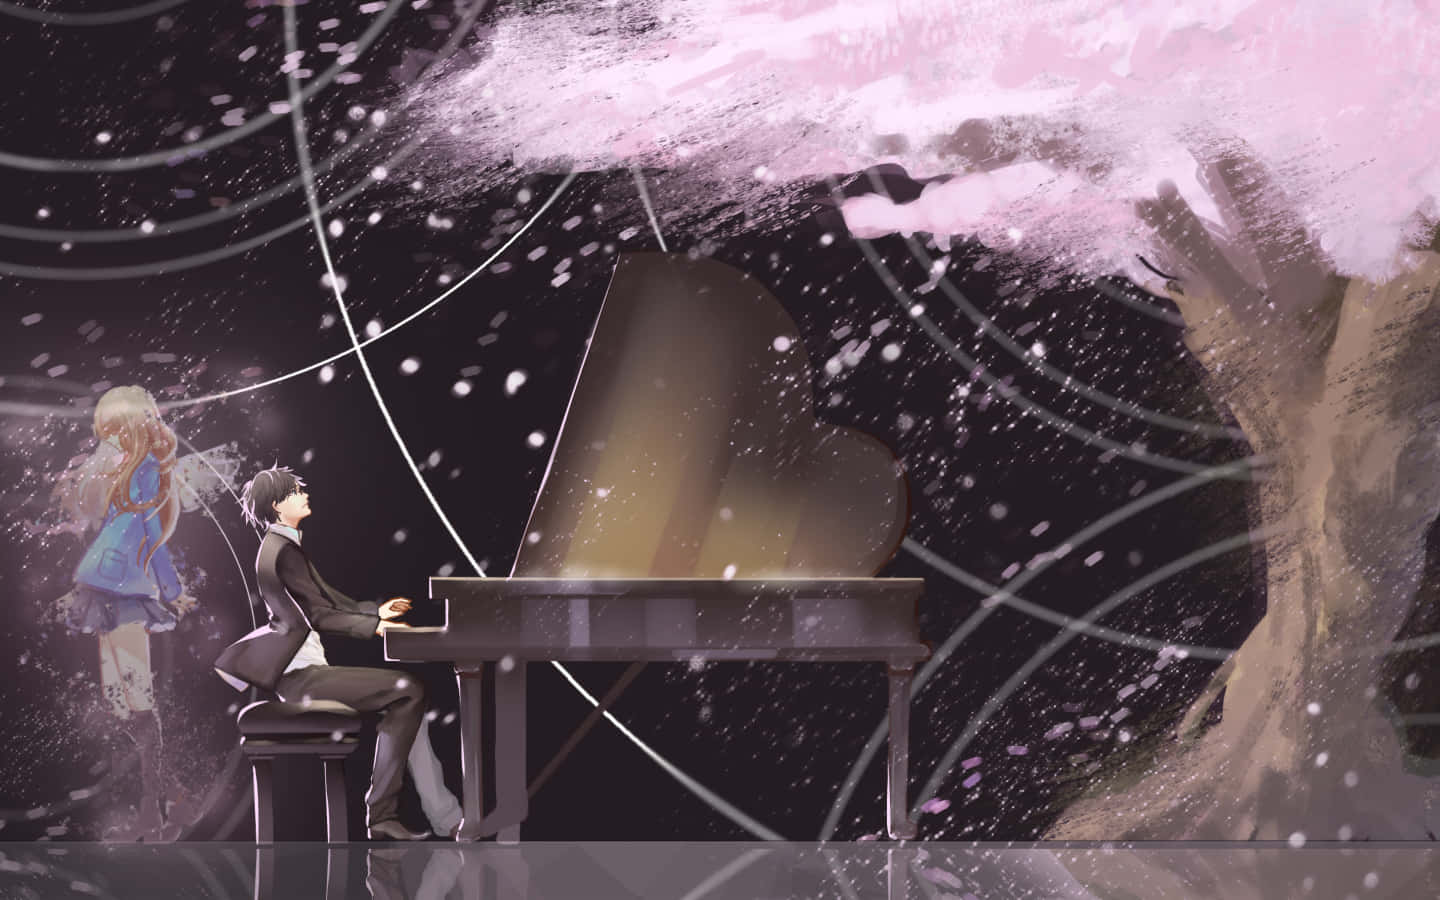 Two musicians playing the piano in an emotional moment from the anime classic, Your Lie in April